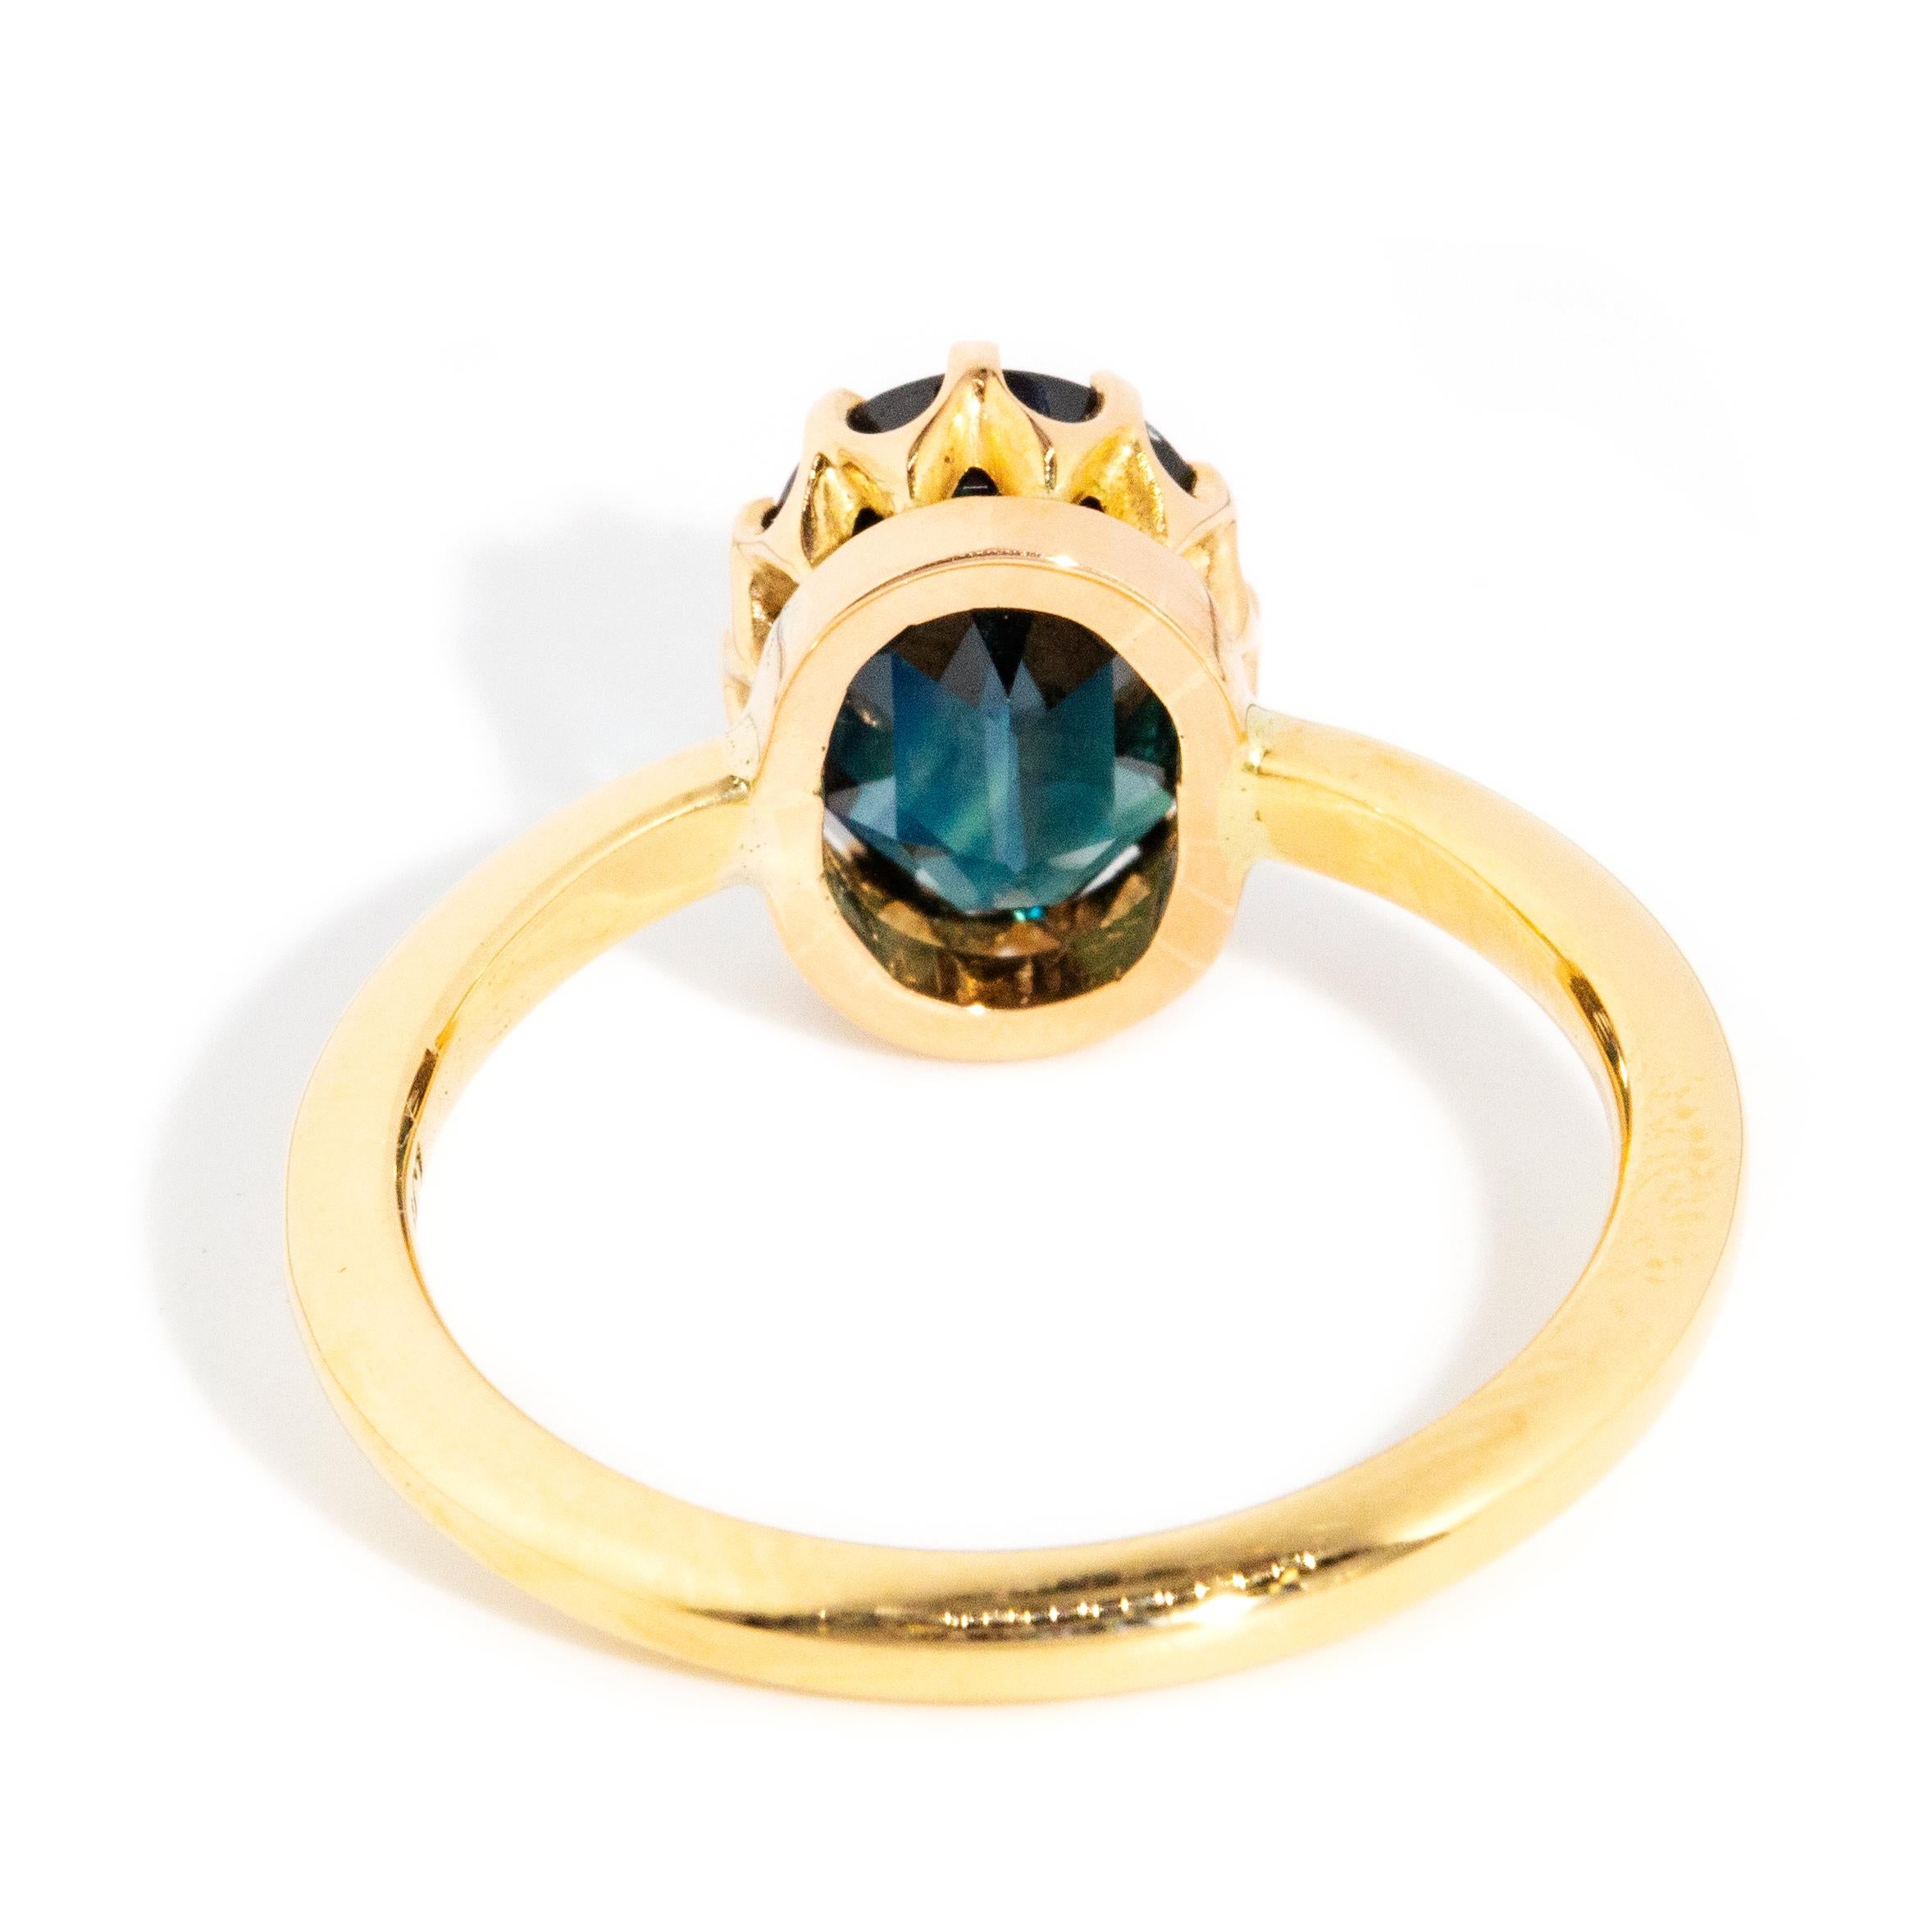 Reinvented Vintage 1930s 3.12 Carat Oval Teal Sapphire Ring 18 Carat Yellow Gold For Sale 1